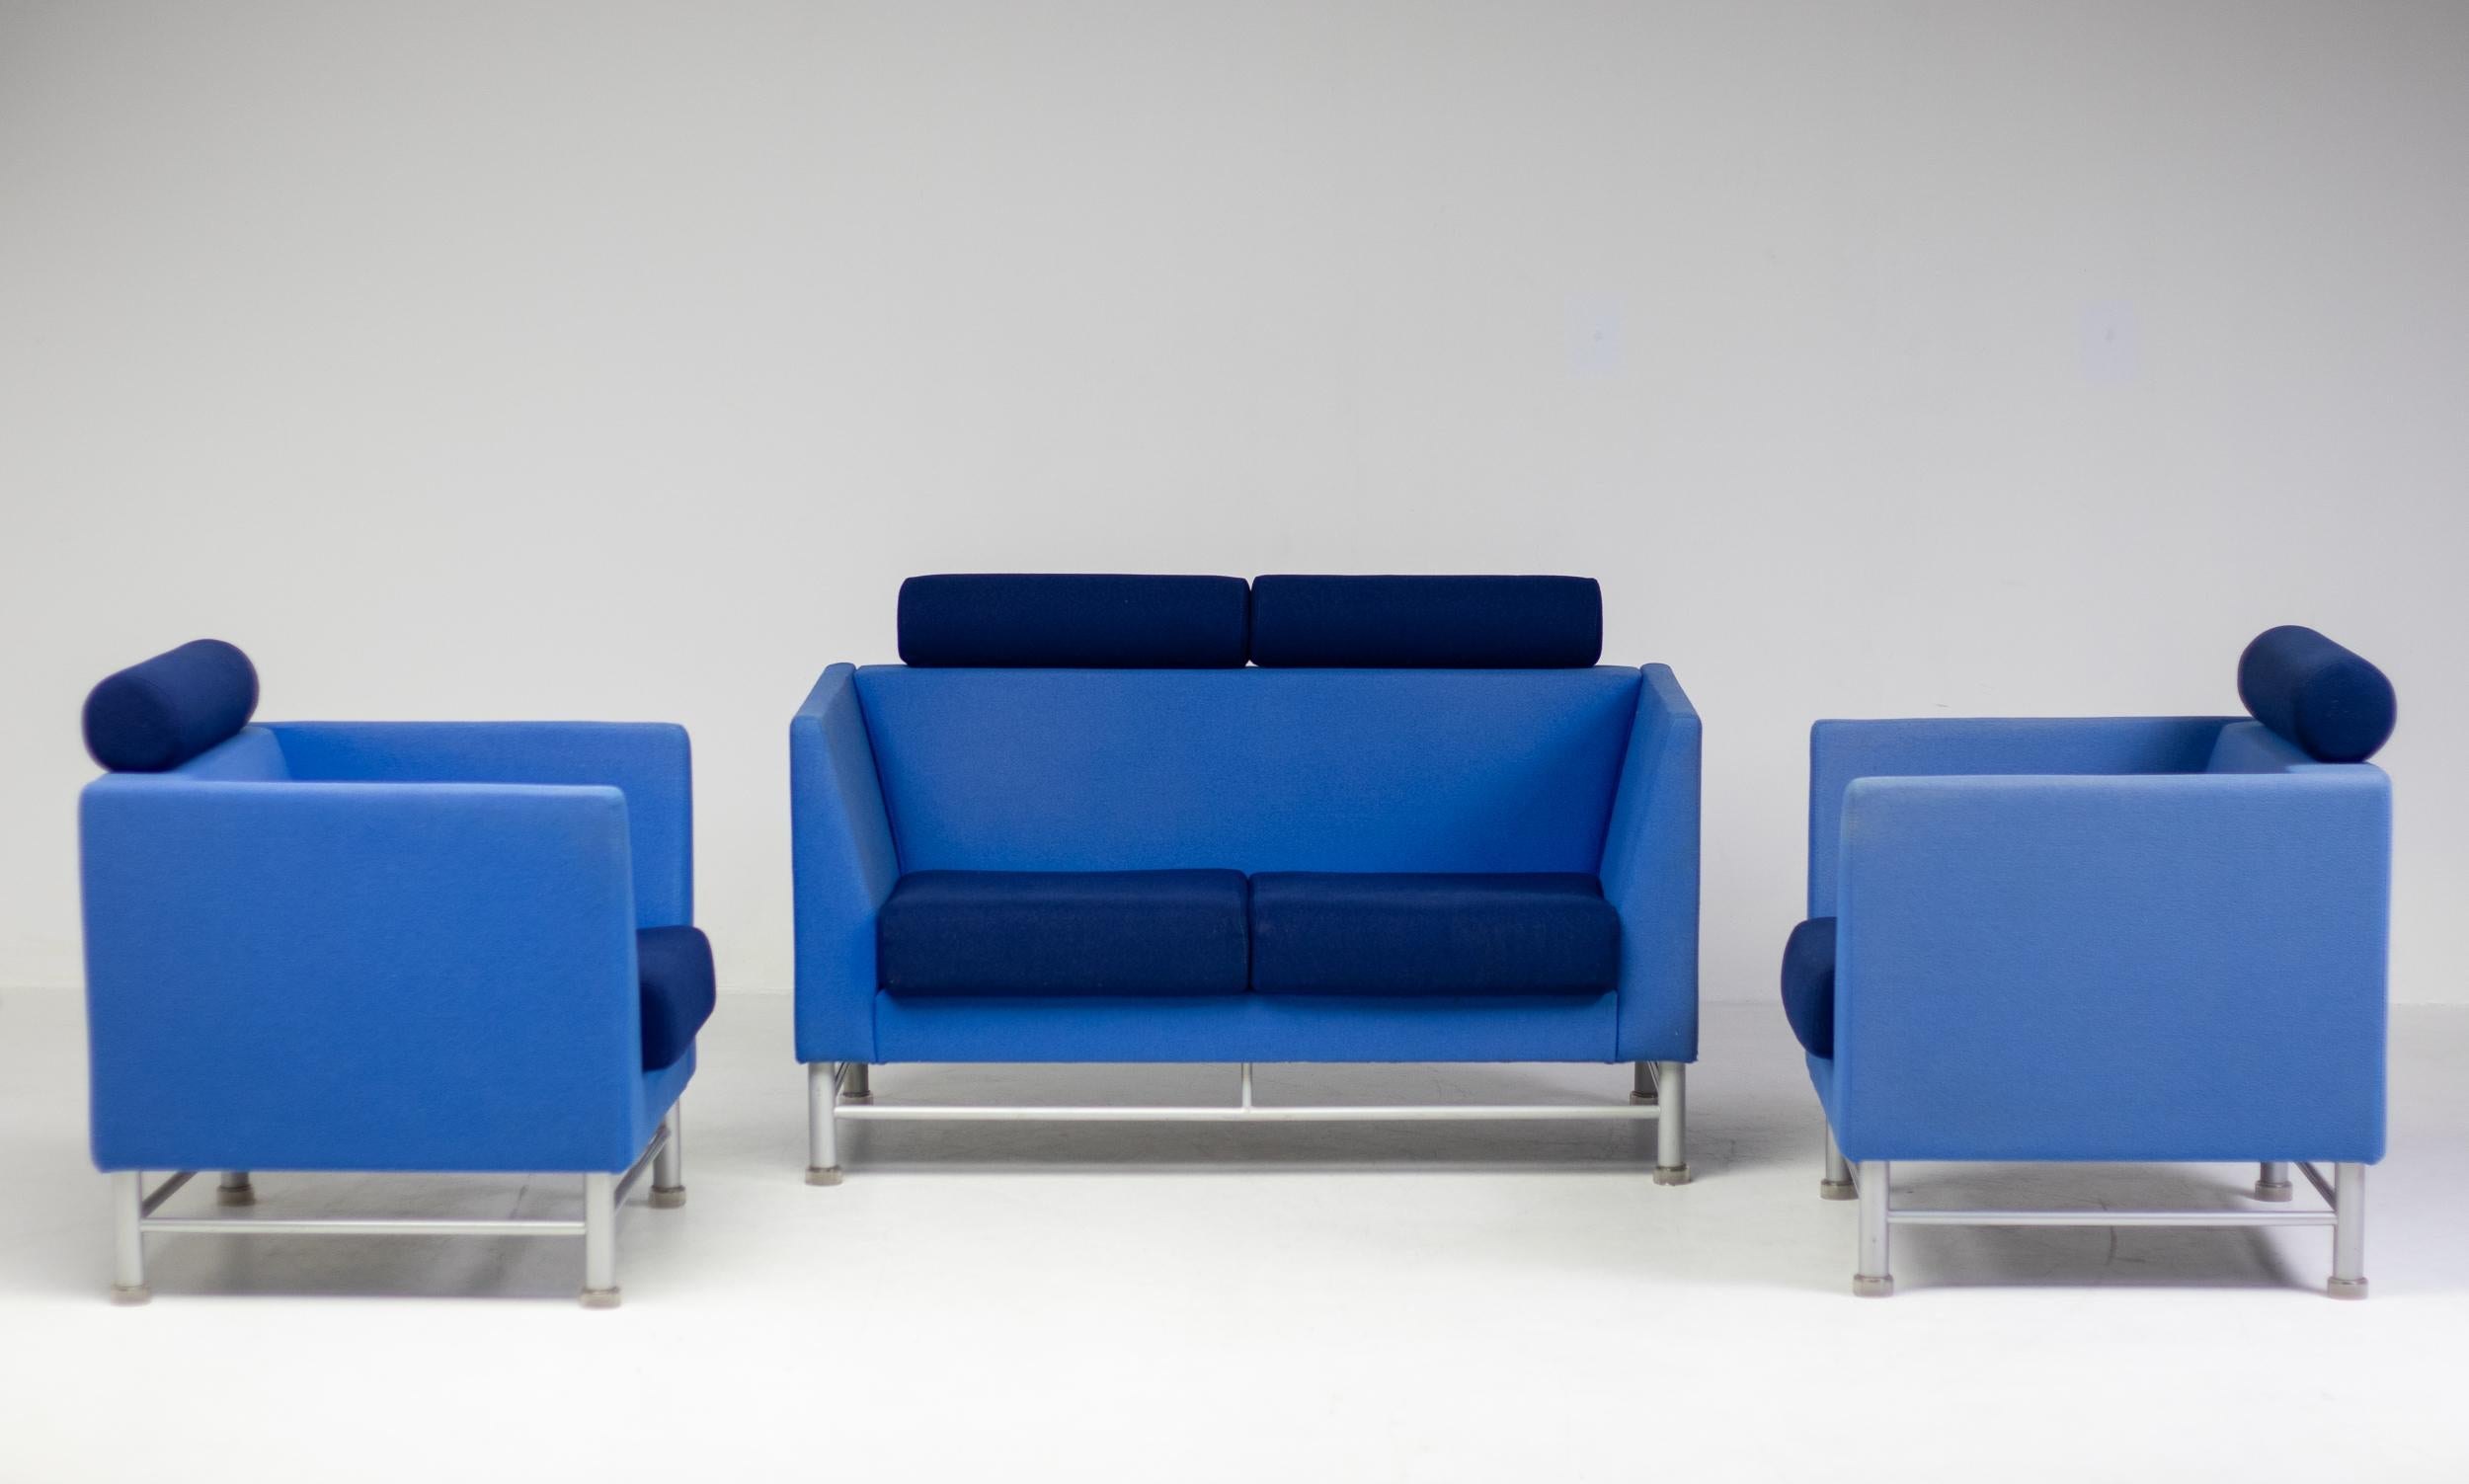 Spectacular East Side sofa and 2 lounge chairs designed by Ettore Sottsass for Knoll International in 1983. 
Post-Modern sofa and armchairs with their original two-tone blue Kvadrat Tonus upholstery in nice vintage condition. The set features a